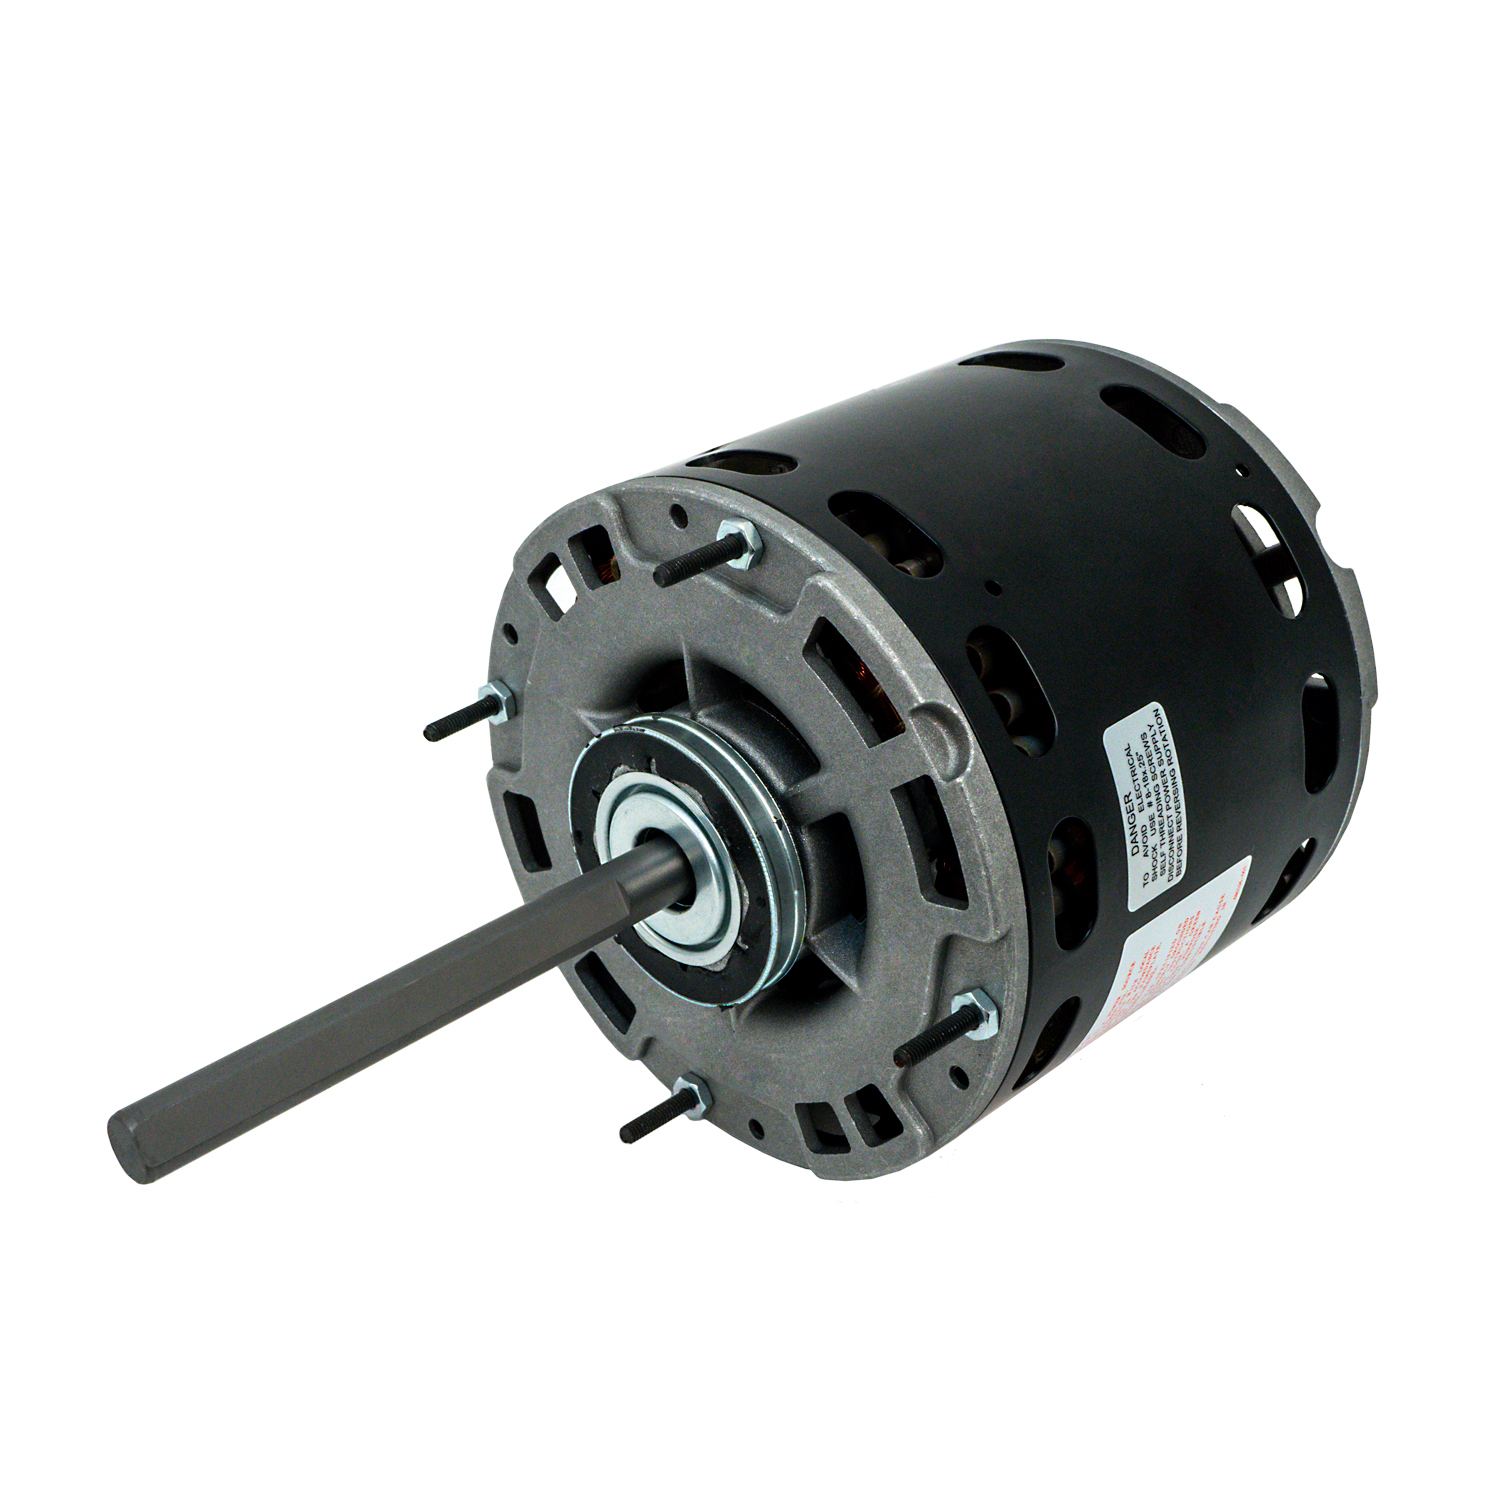 A1 Components Replacement 48 Frame Blower Motor 3/4 HP 3 Speed F5025 by Packard for sale online 